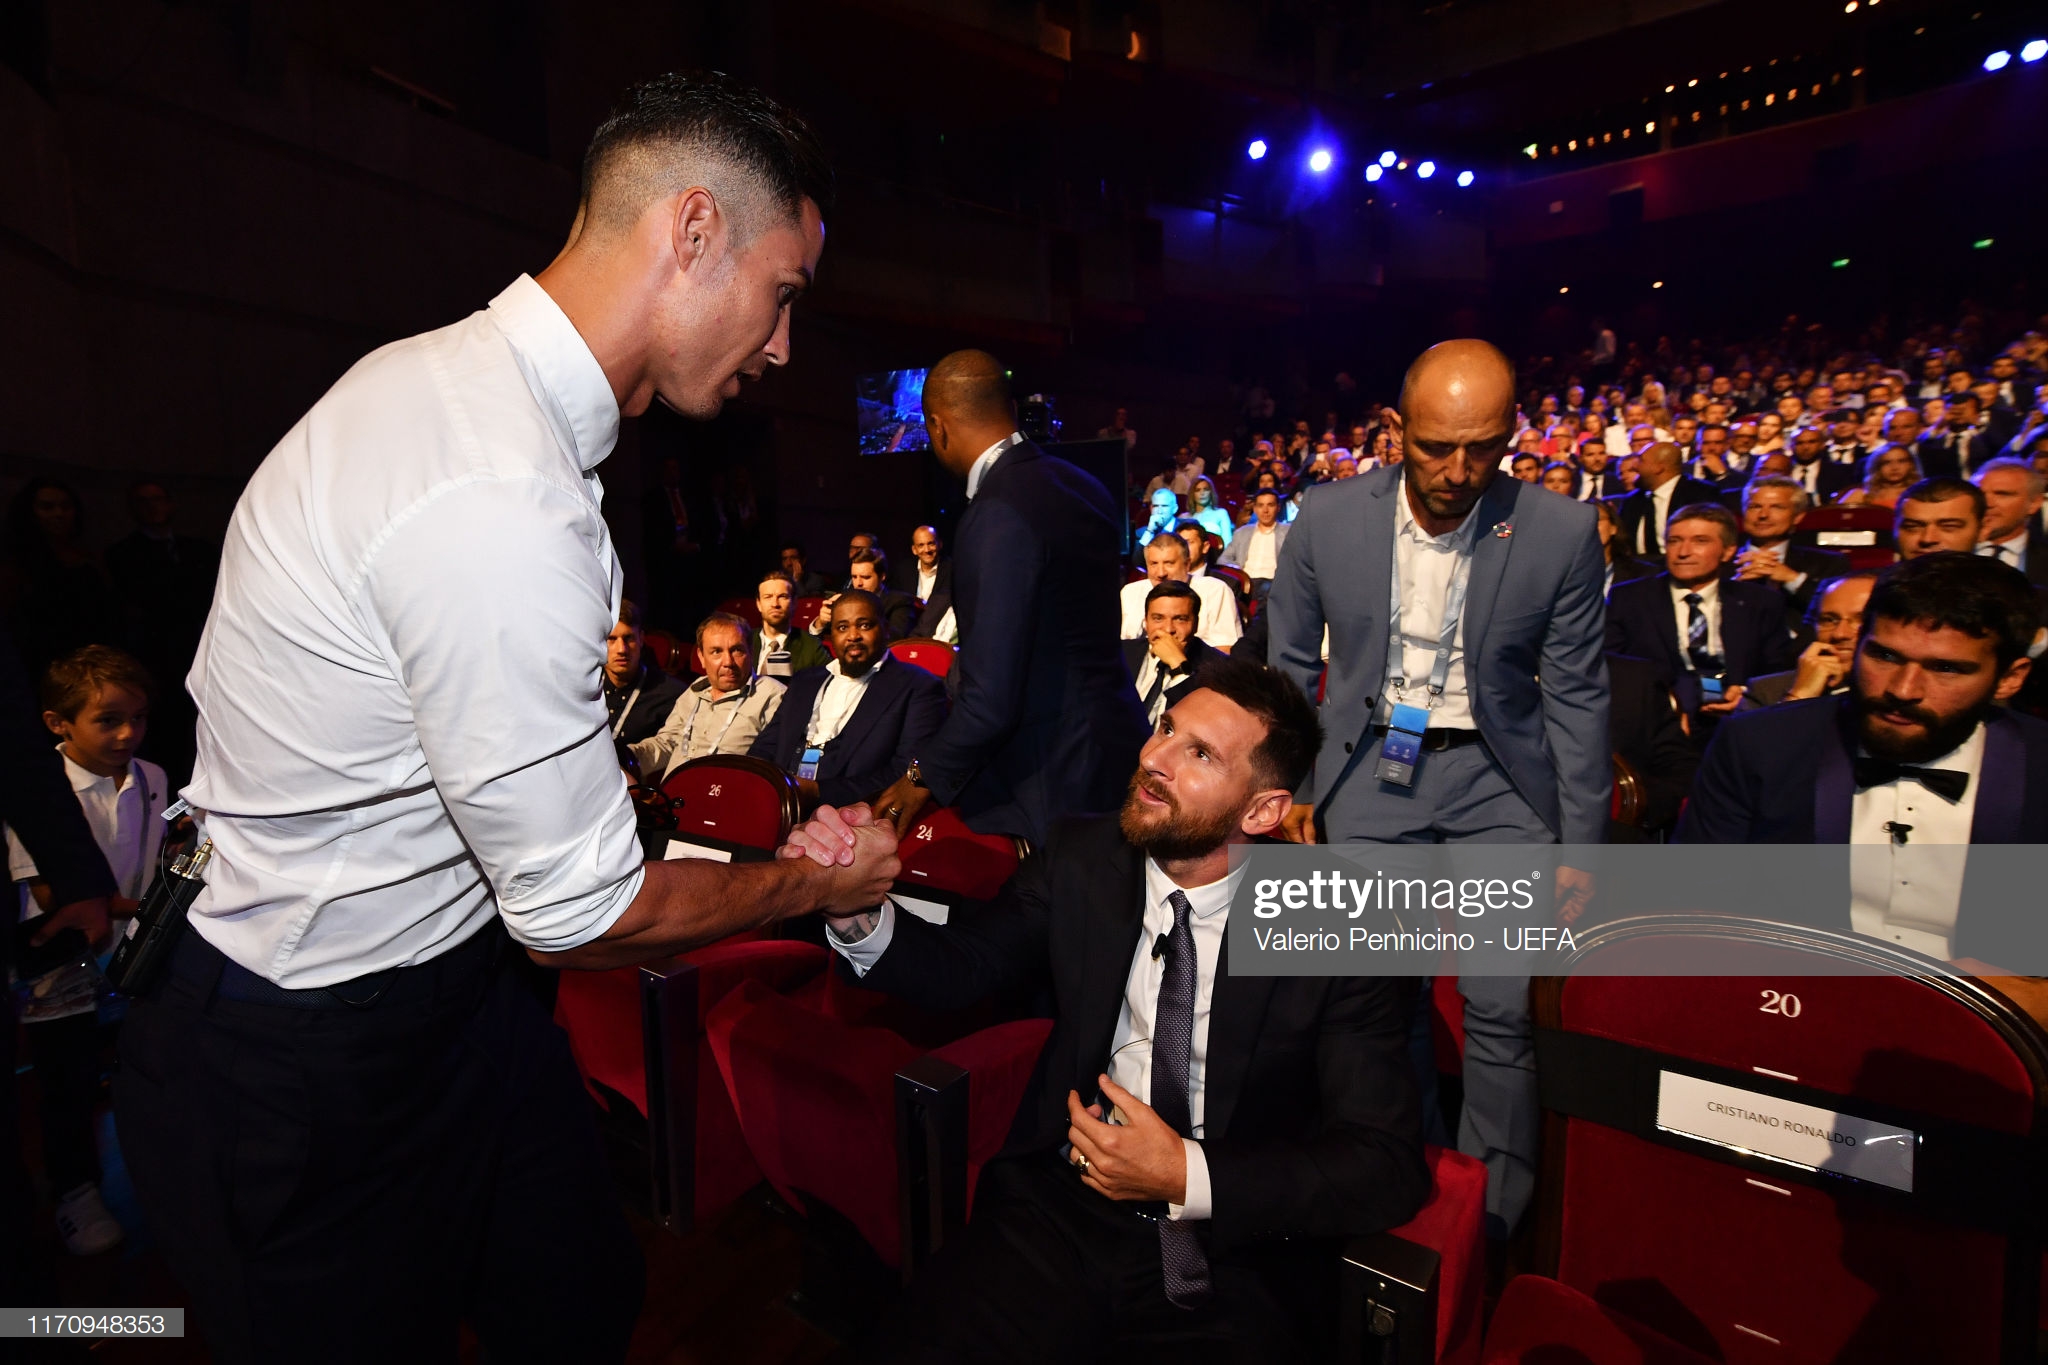 gettyimages-1170948353-2048x2048.jpg